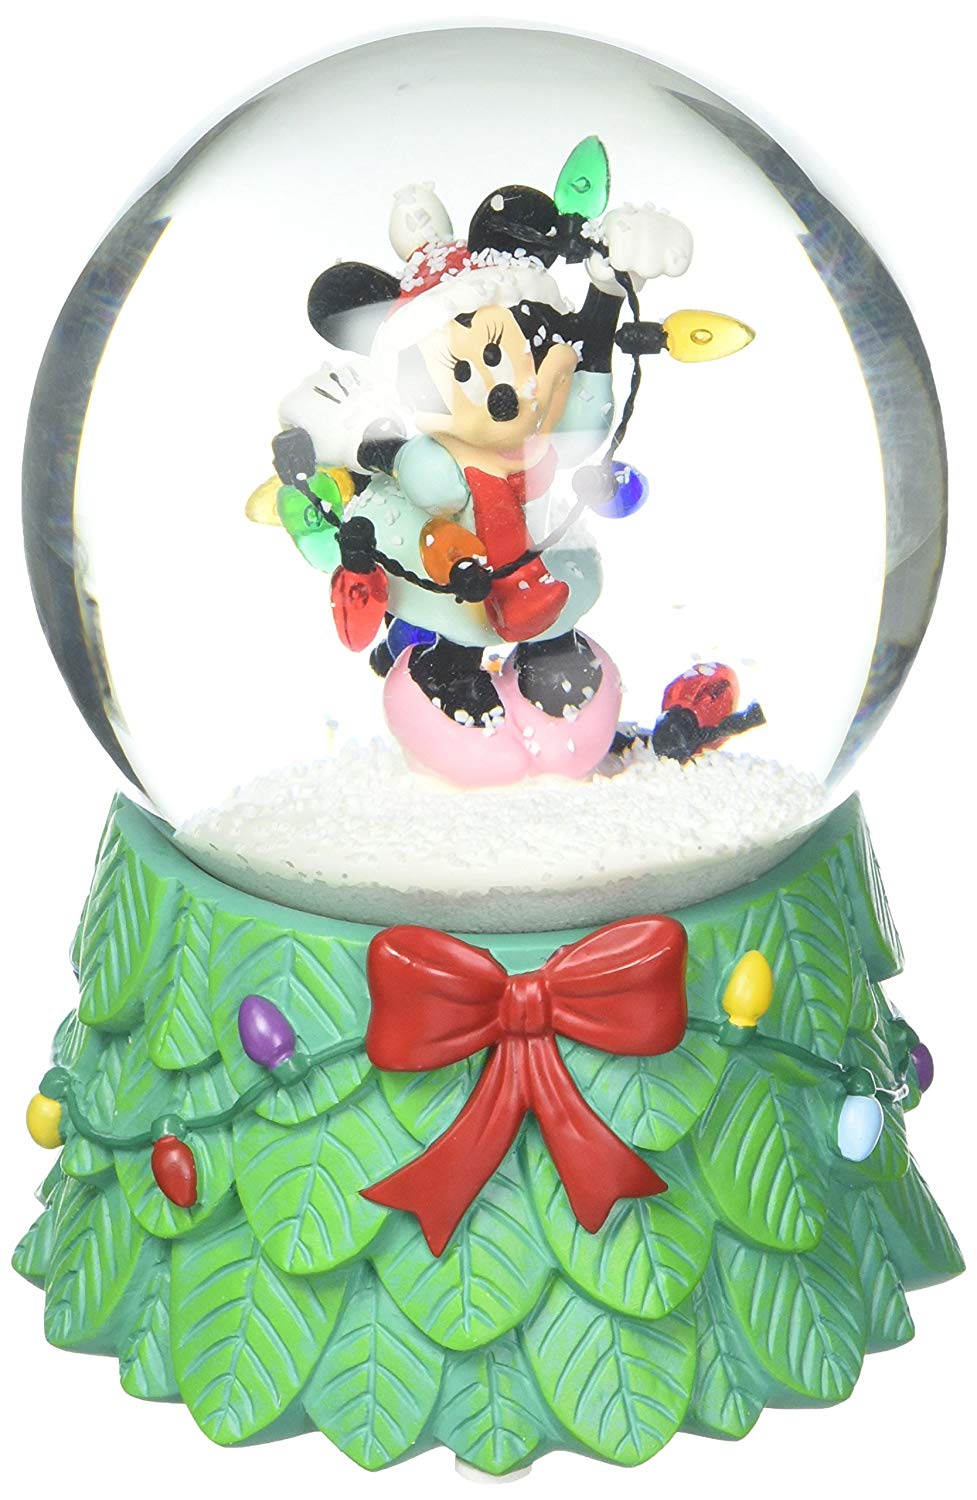 Department 56 : Disney Minnie with Lights Water Globe - Sheldonet Toy Store